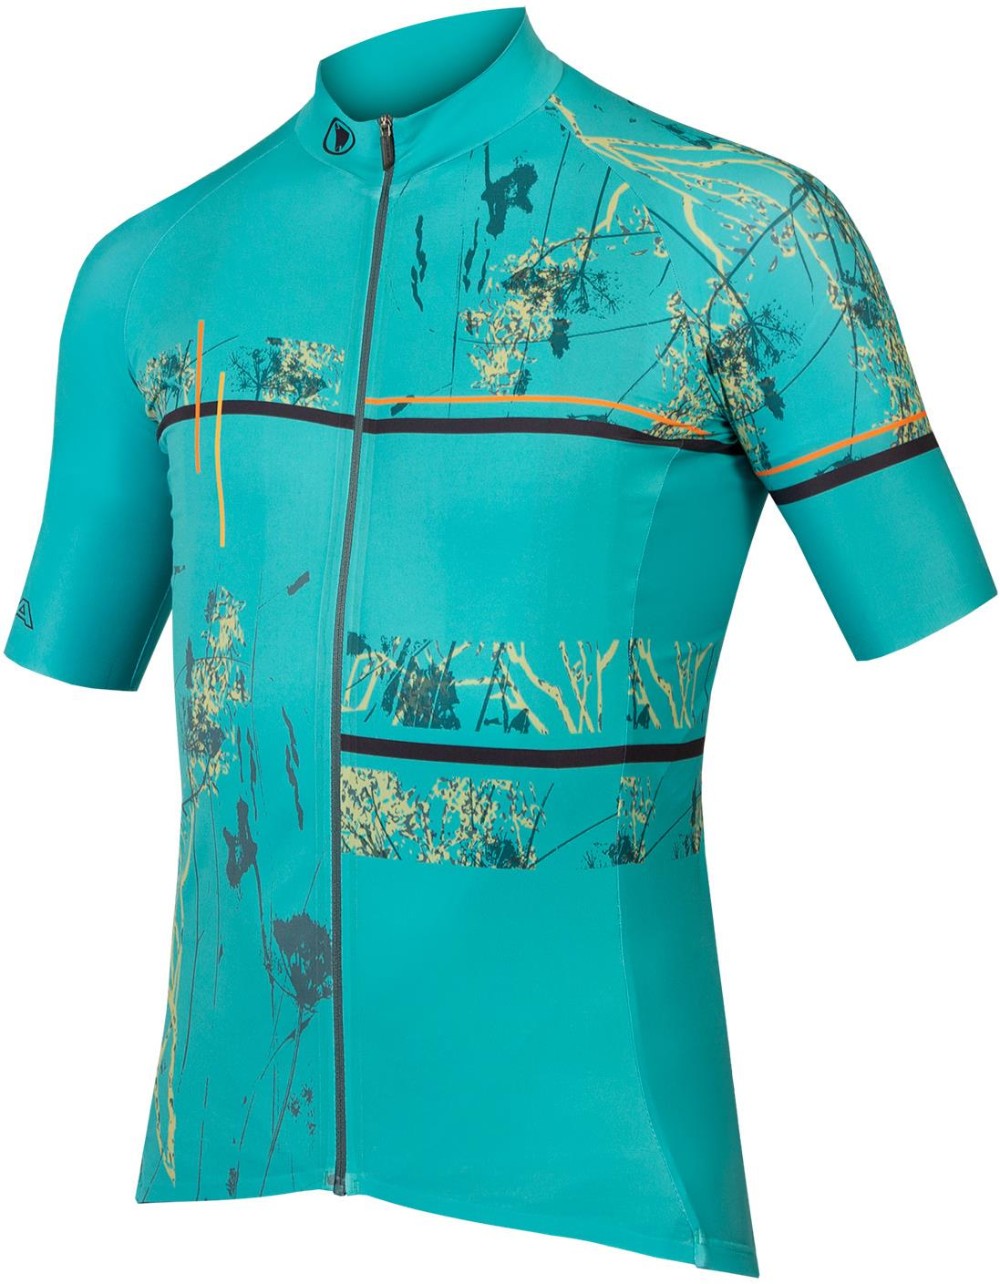 Outdoor Trail Short Sleeve Cycling Jersey Limited Edition image 0